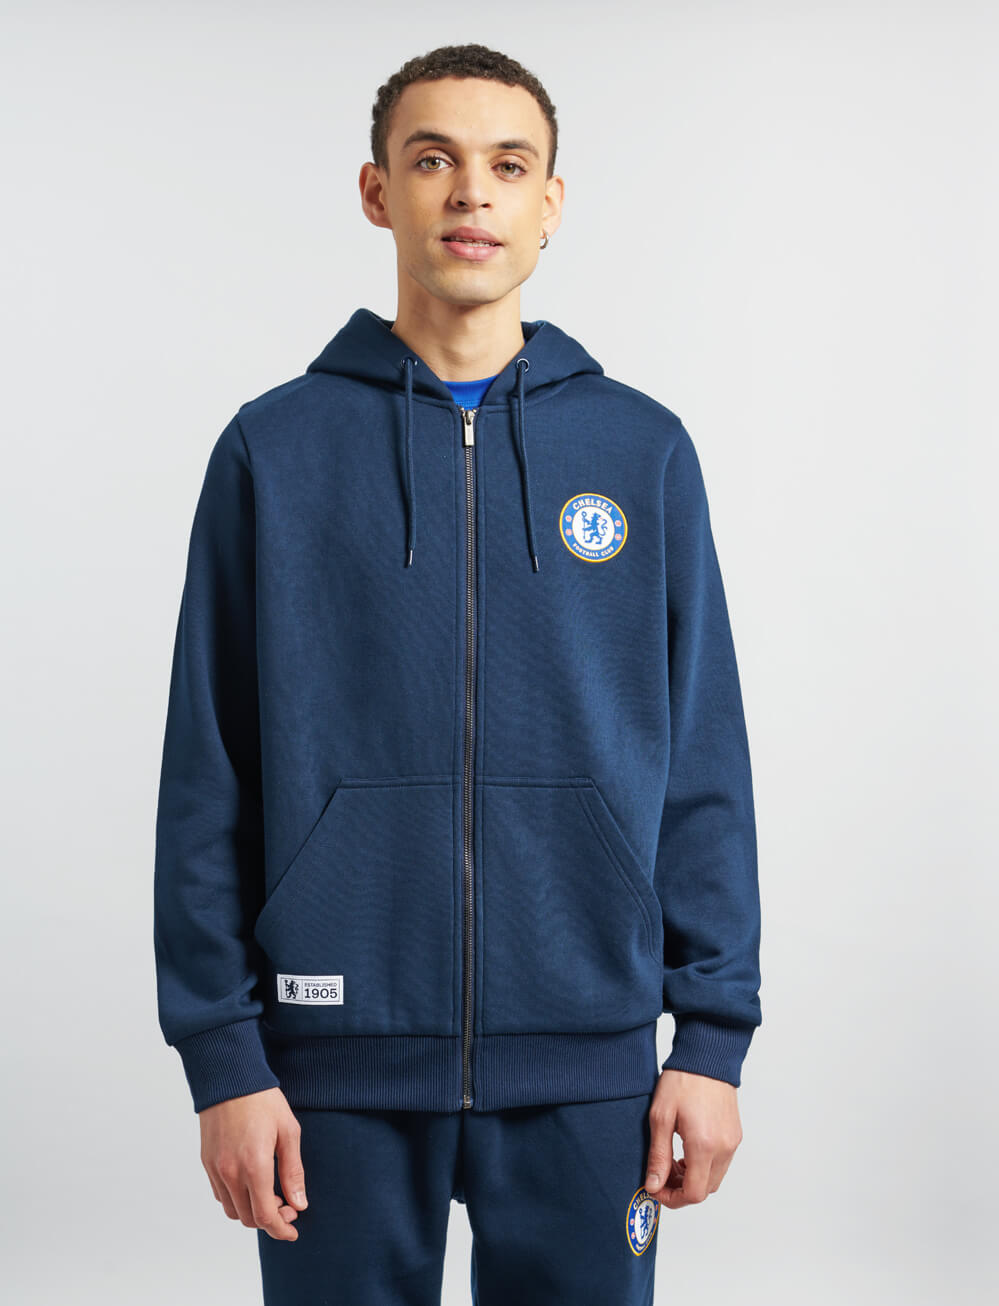 Official Chelsea Full Zip Hoodie - Navy - The World Football Store